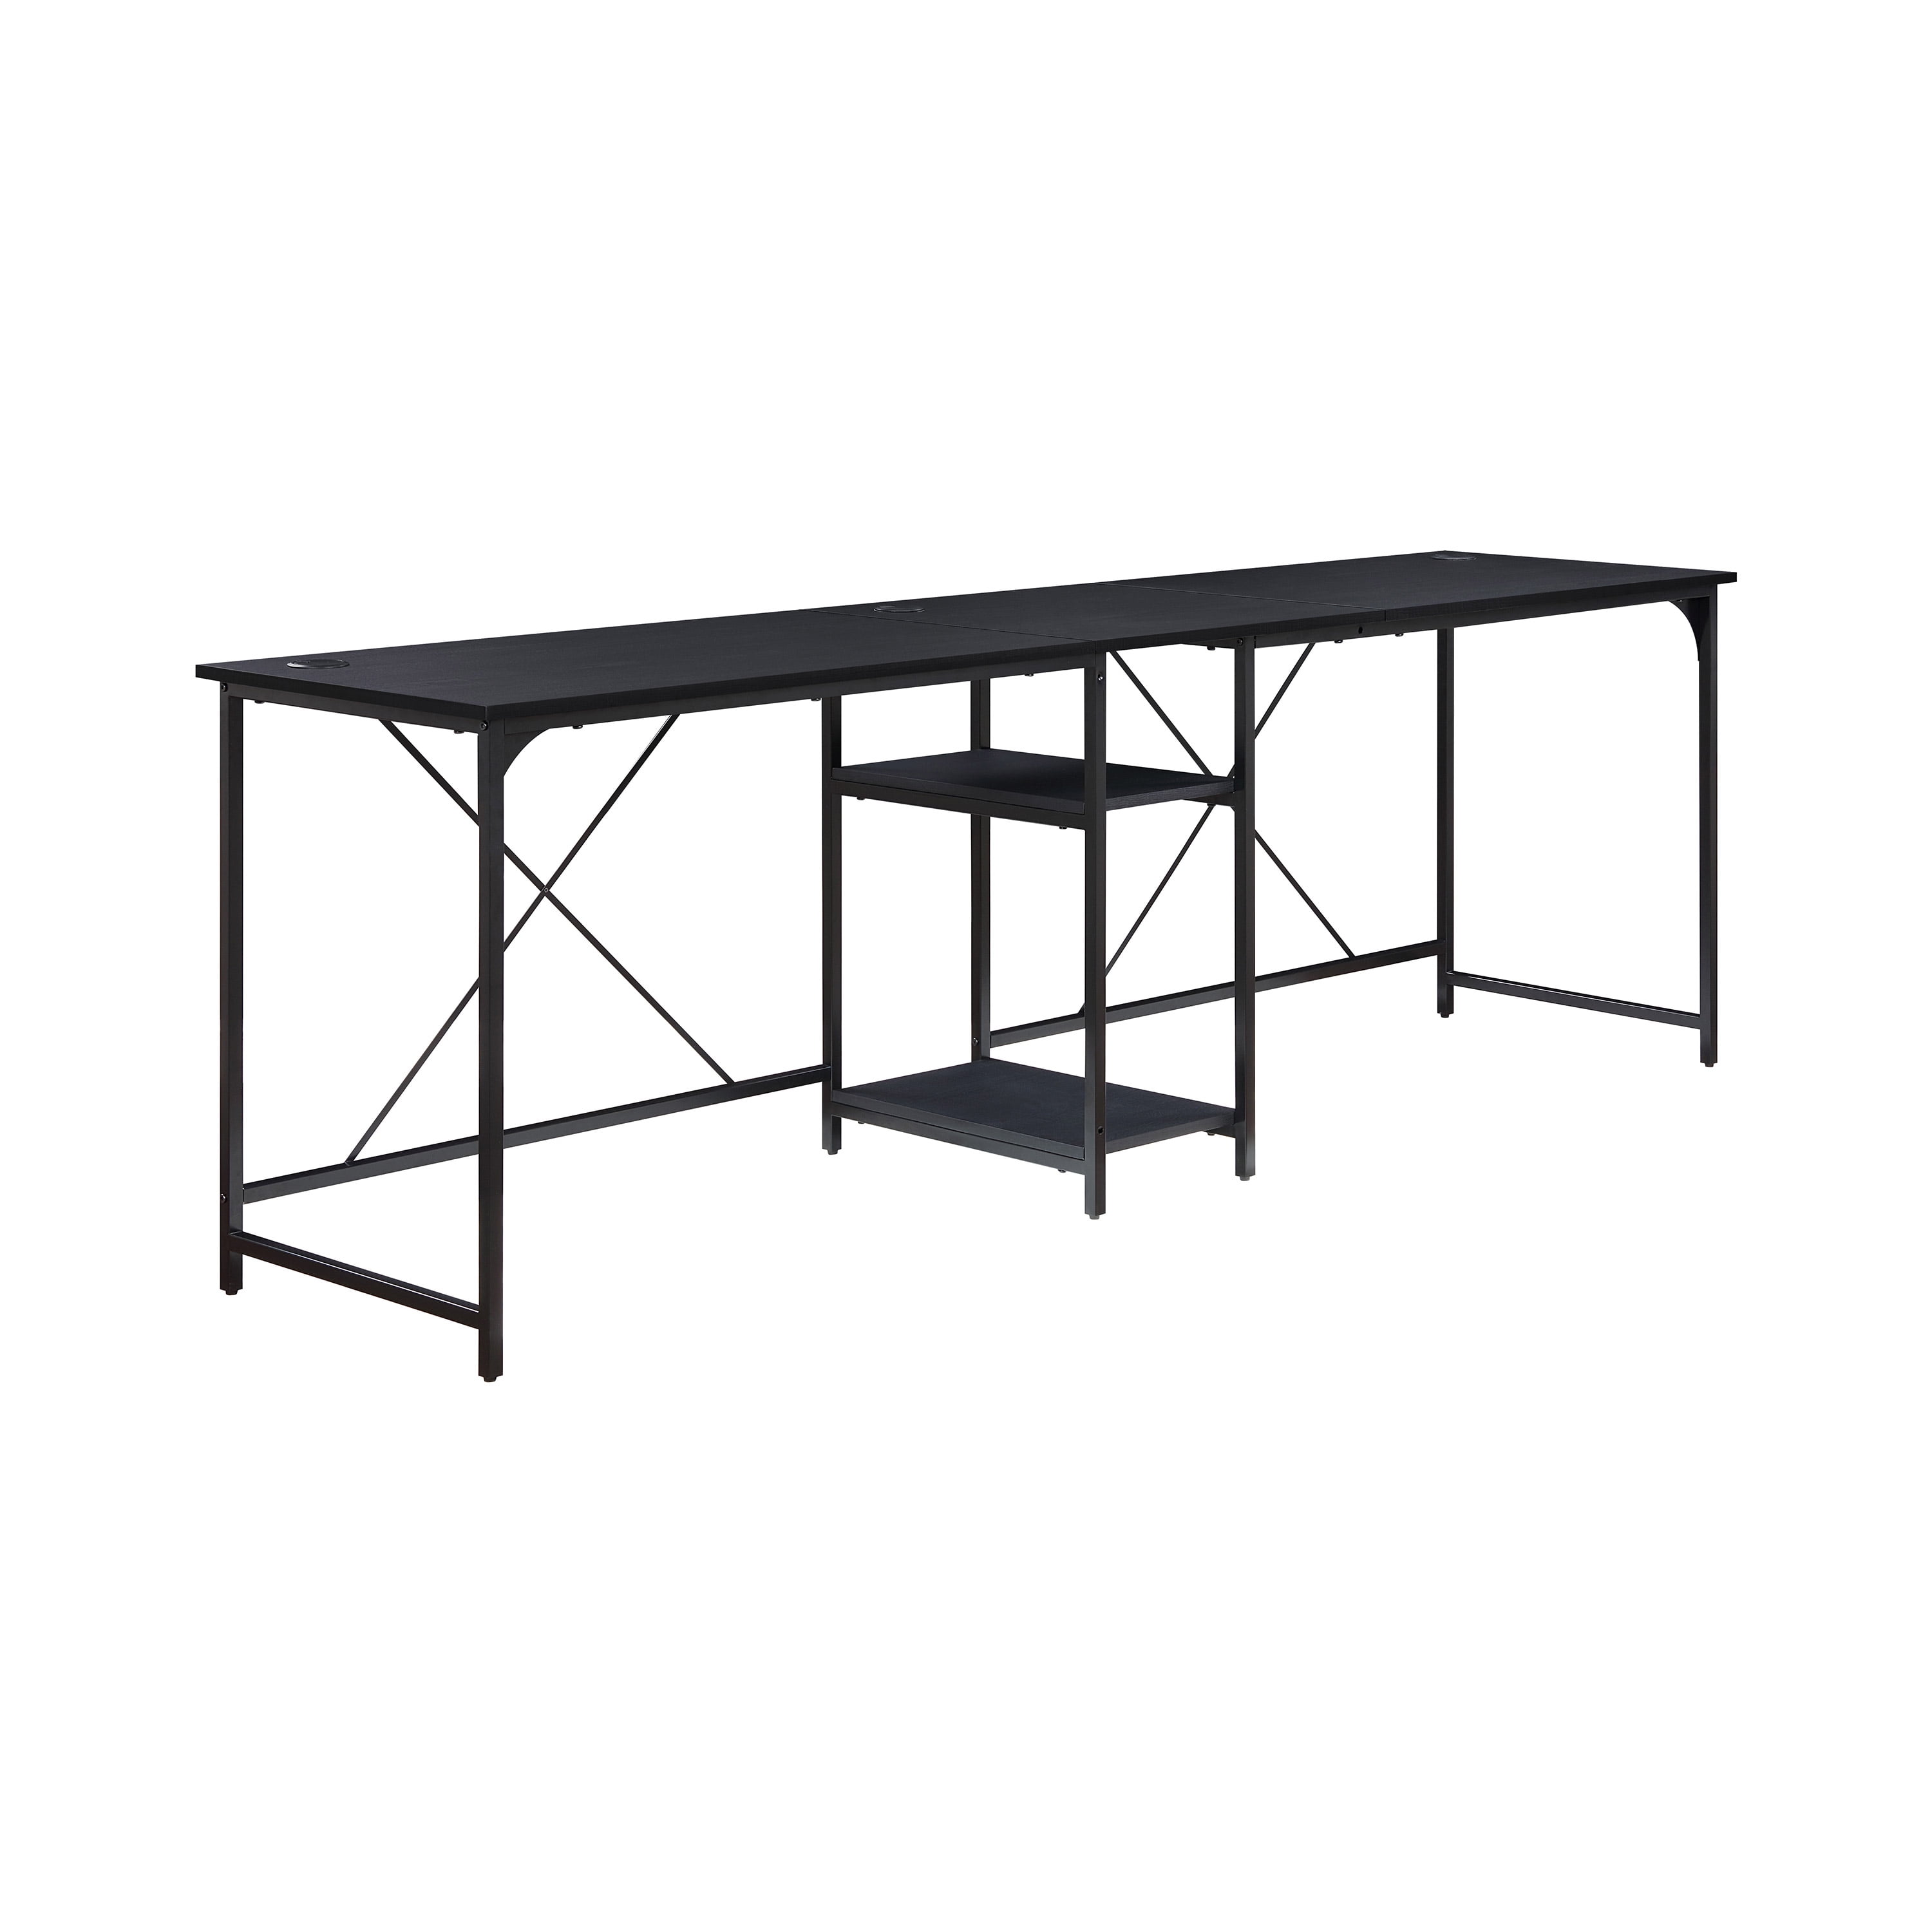 Mainstays Two-Way Convertible Desk with Lower Storage Shelf, Charcoal Finish and Black Metal Frame - 2